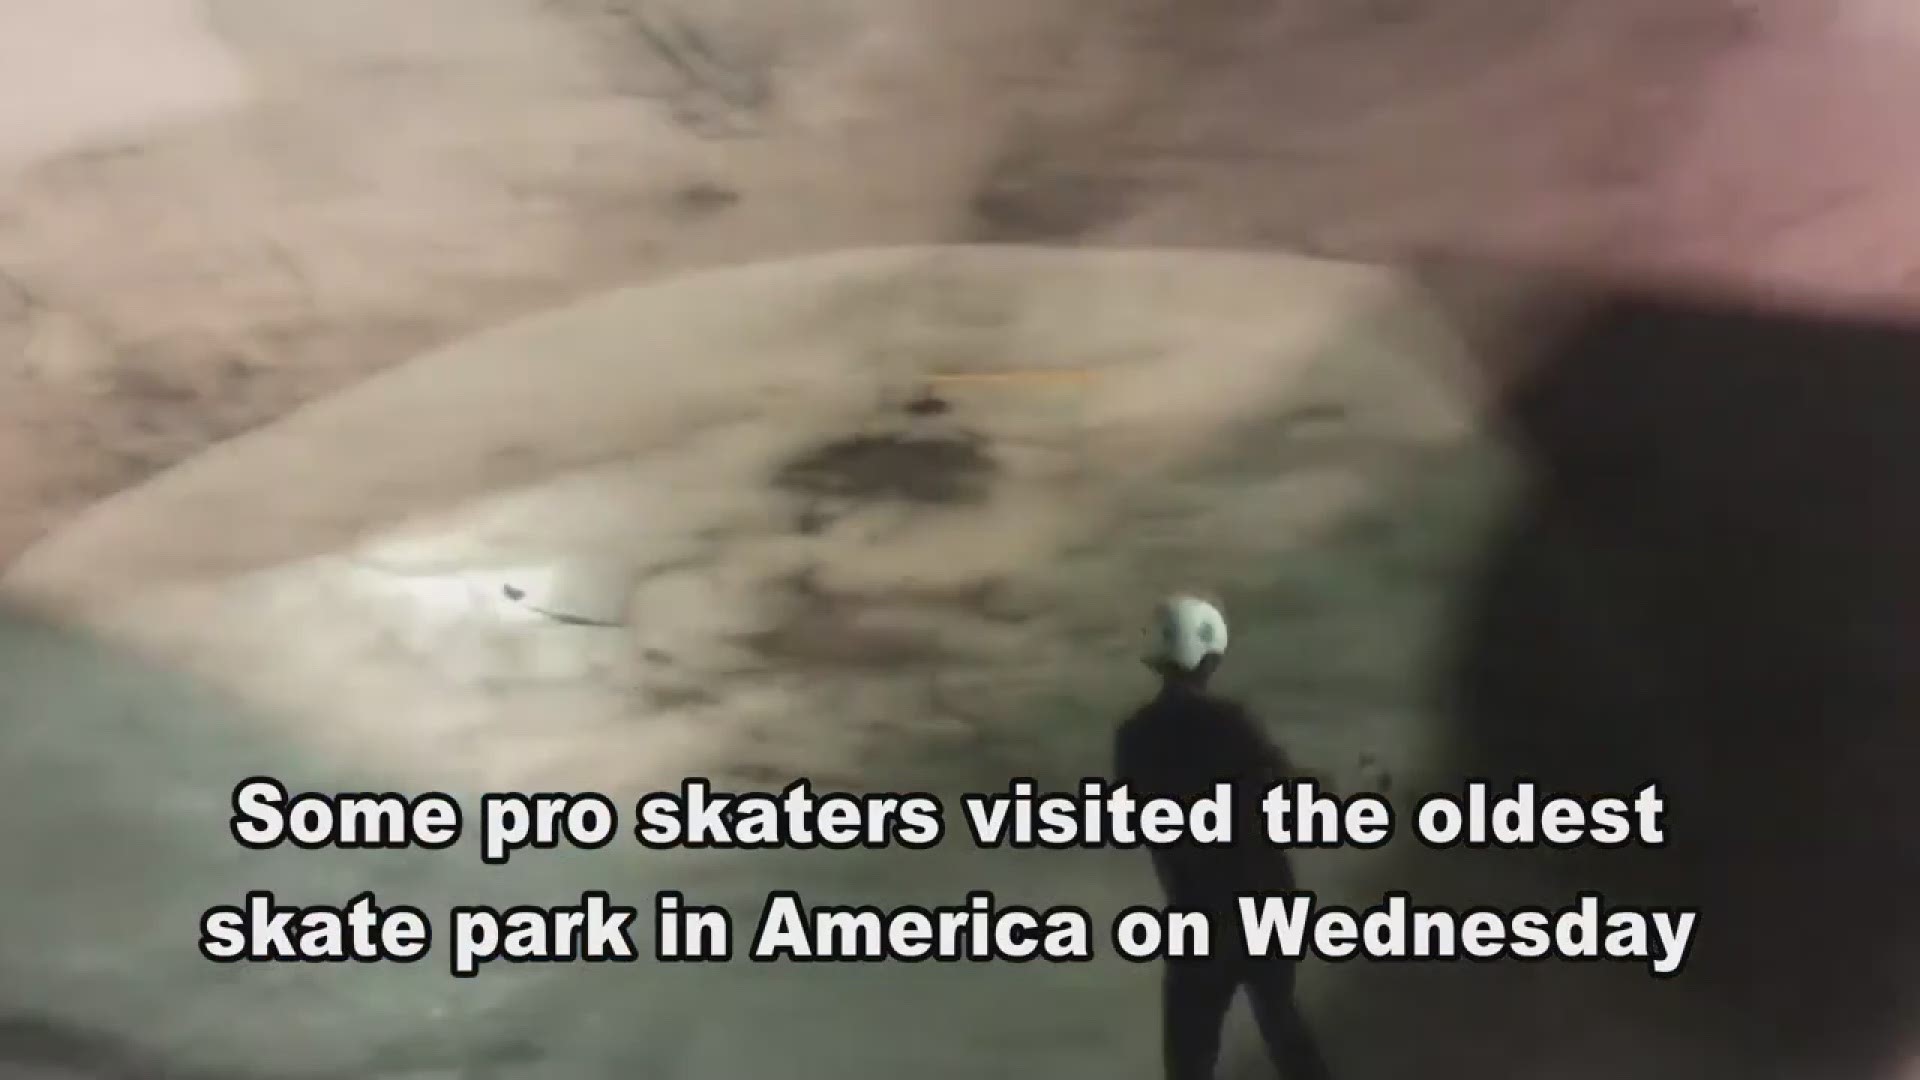 FCN was there and spoke with some of the skateboarders.